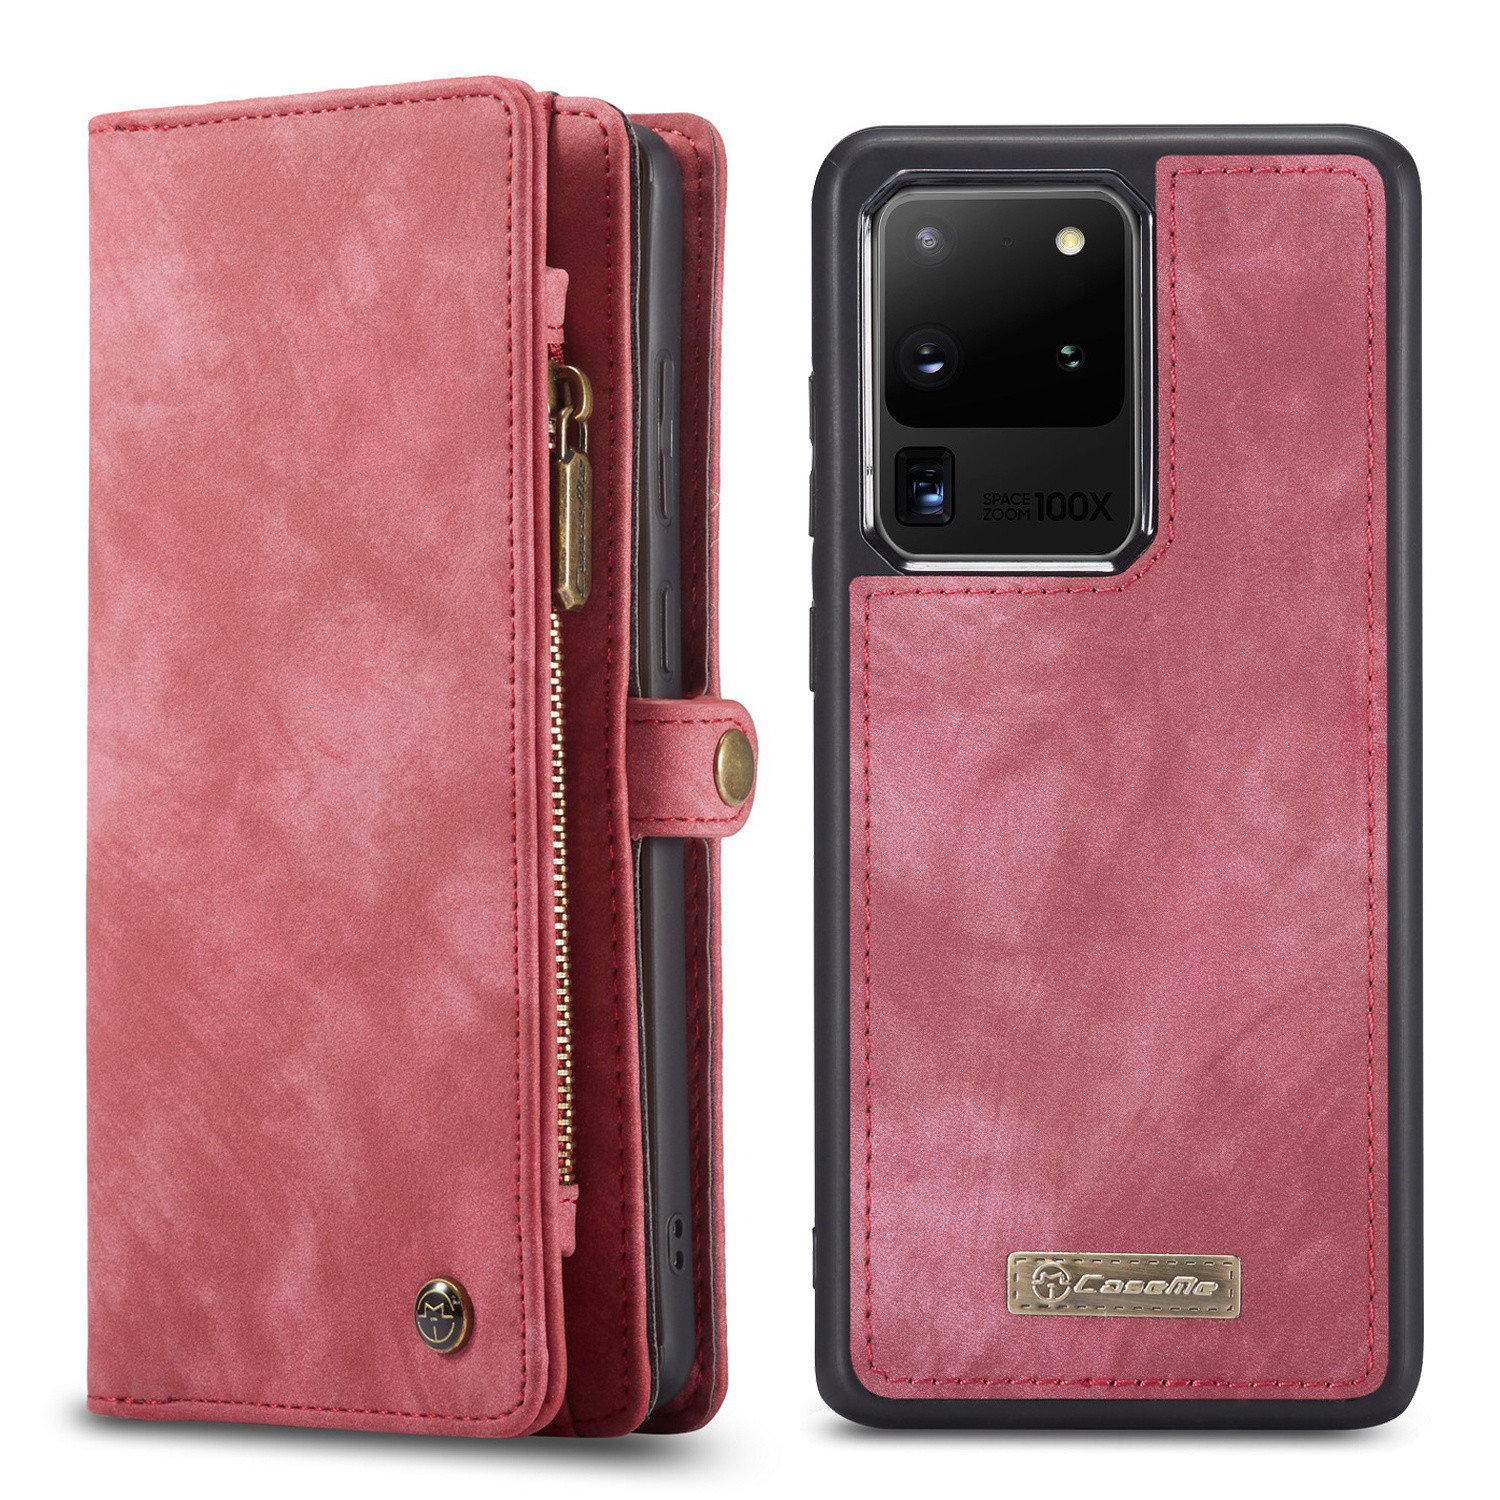 Caseme - vintage 2 in 1 portemonnee hoes - Samsung Galaxy S20 Ultra - Rood